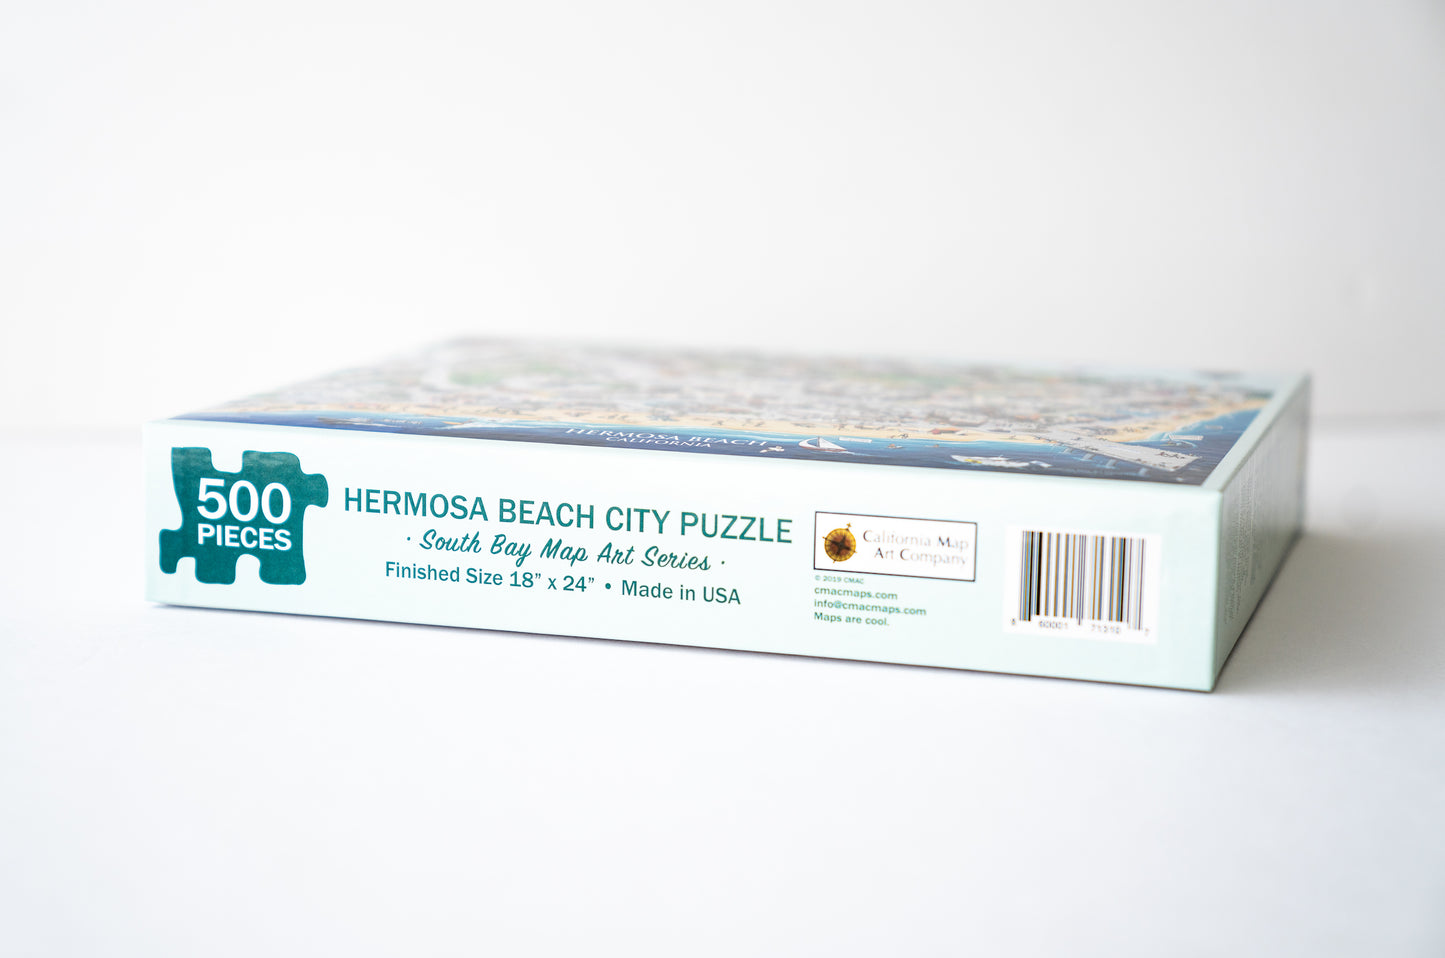 Hermosa Beach Puzzle & Poster